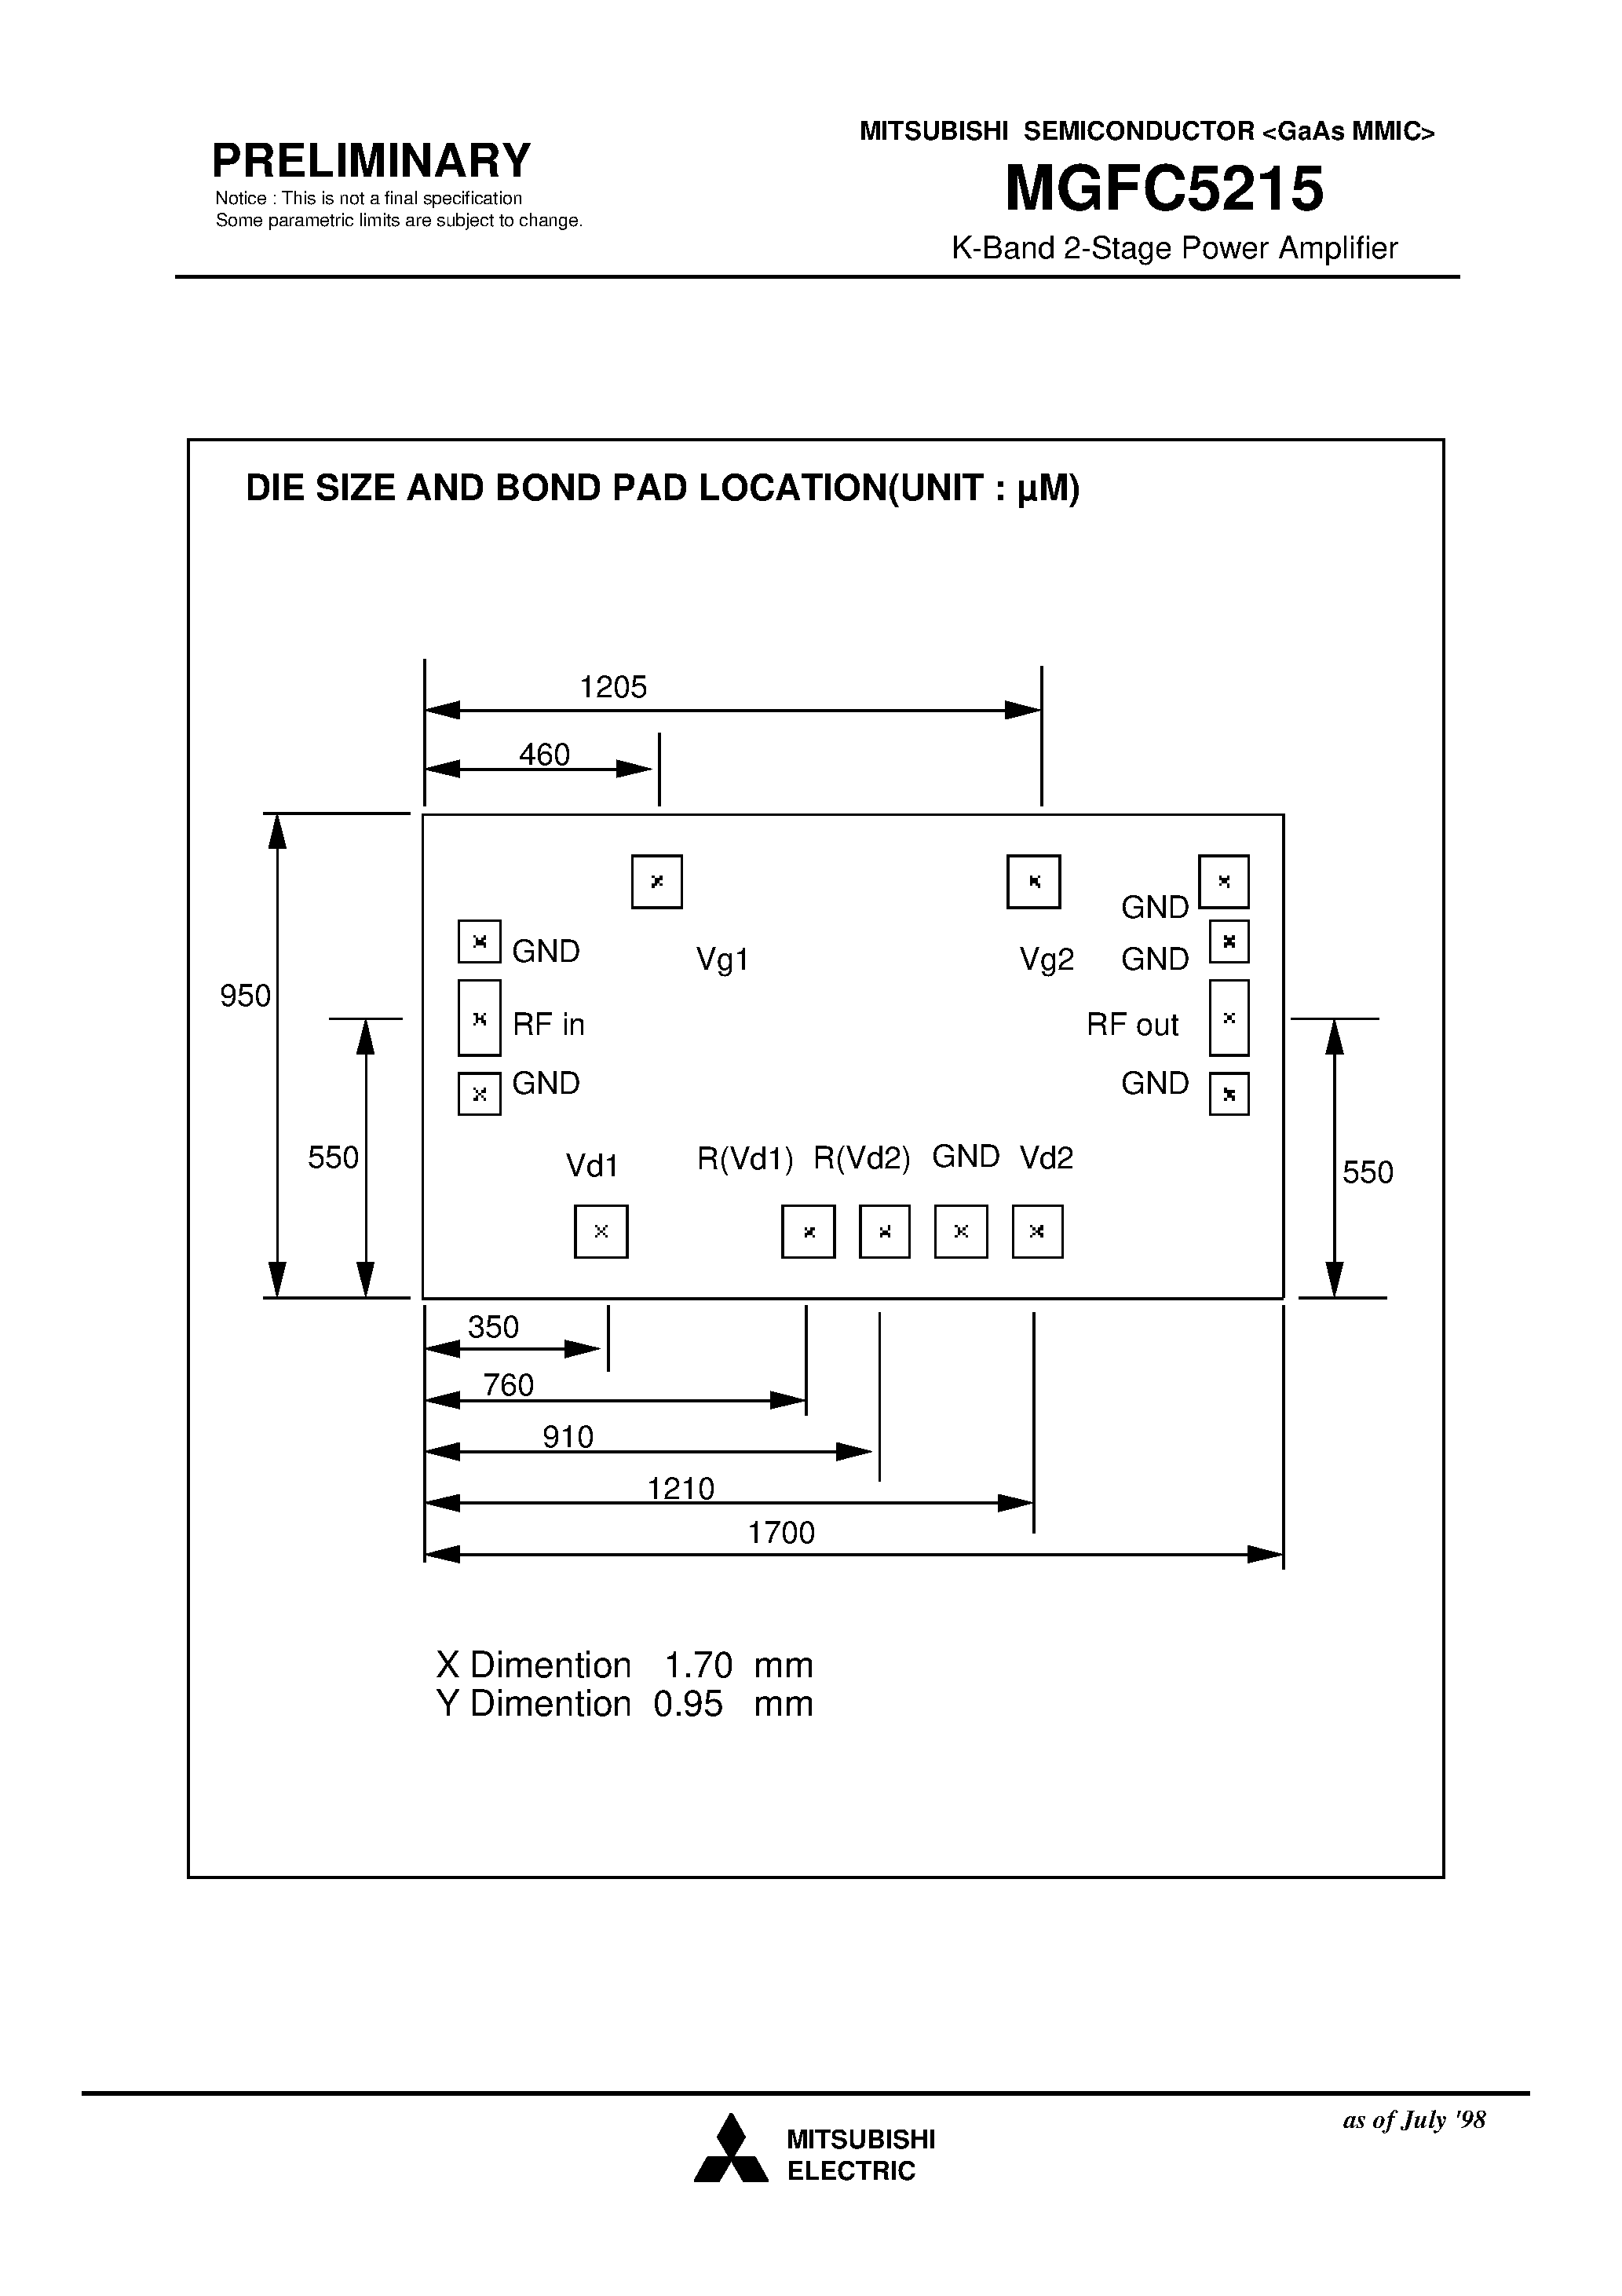 Datasheet MGFC5215 - K-Band 2-Stage Power Amplifier page 2